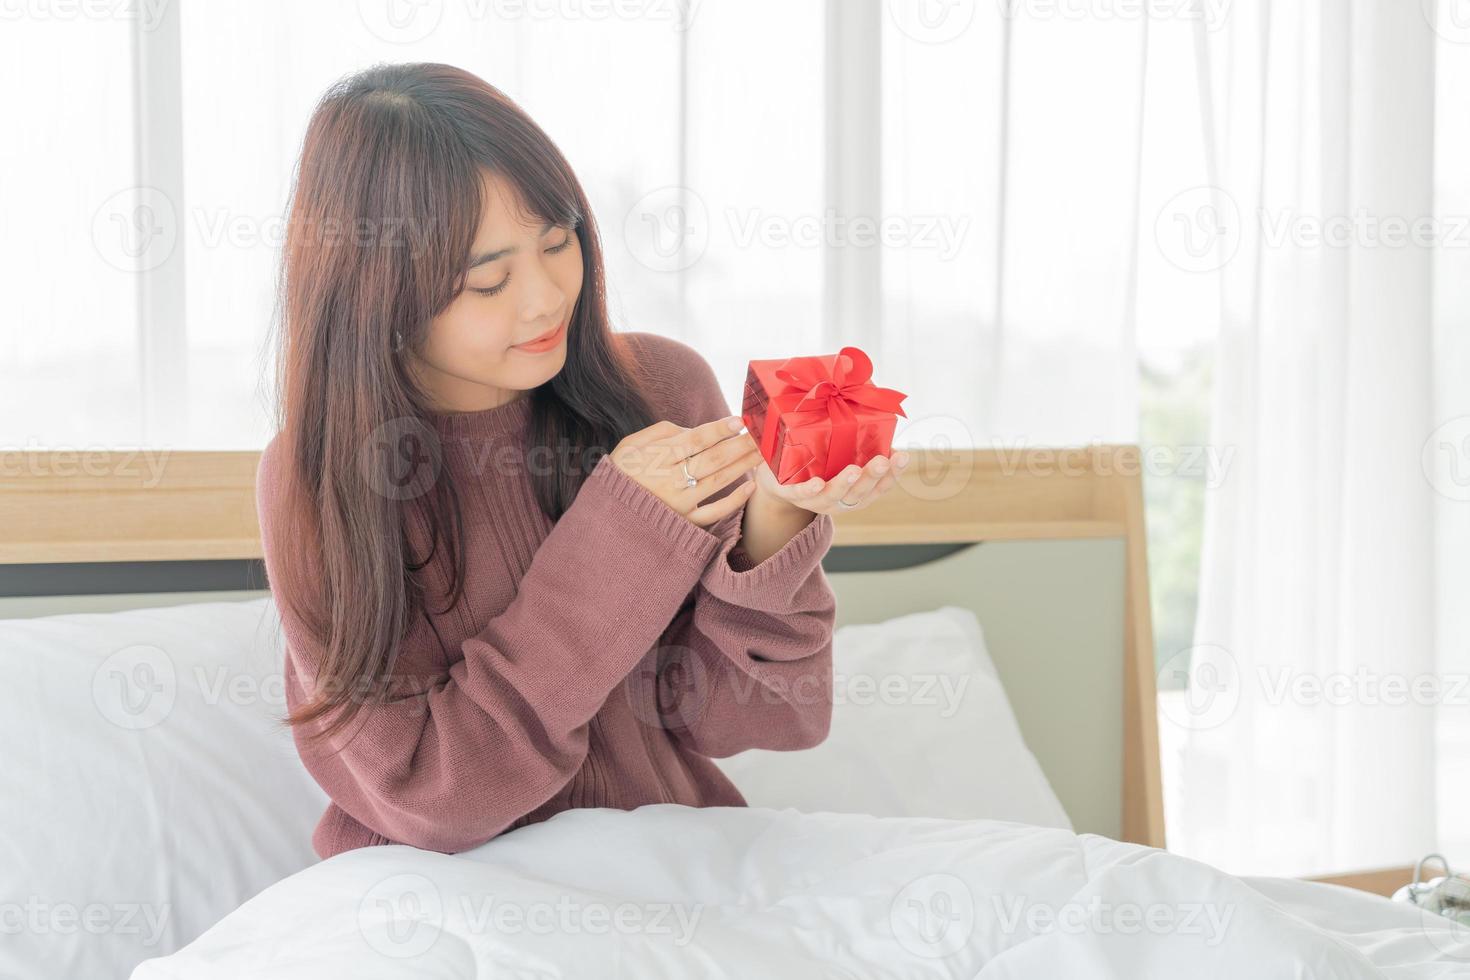 Asian woman happy to receive a gift box or present photo